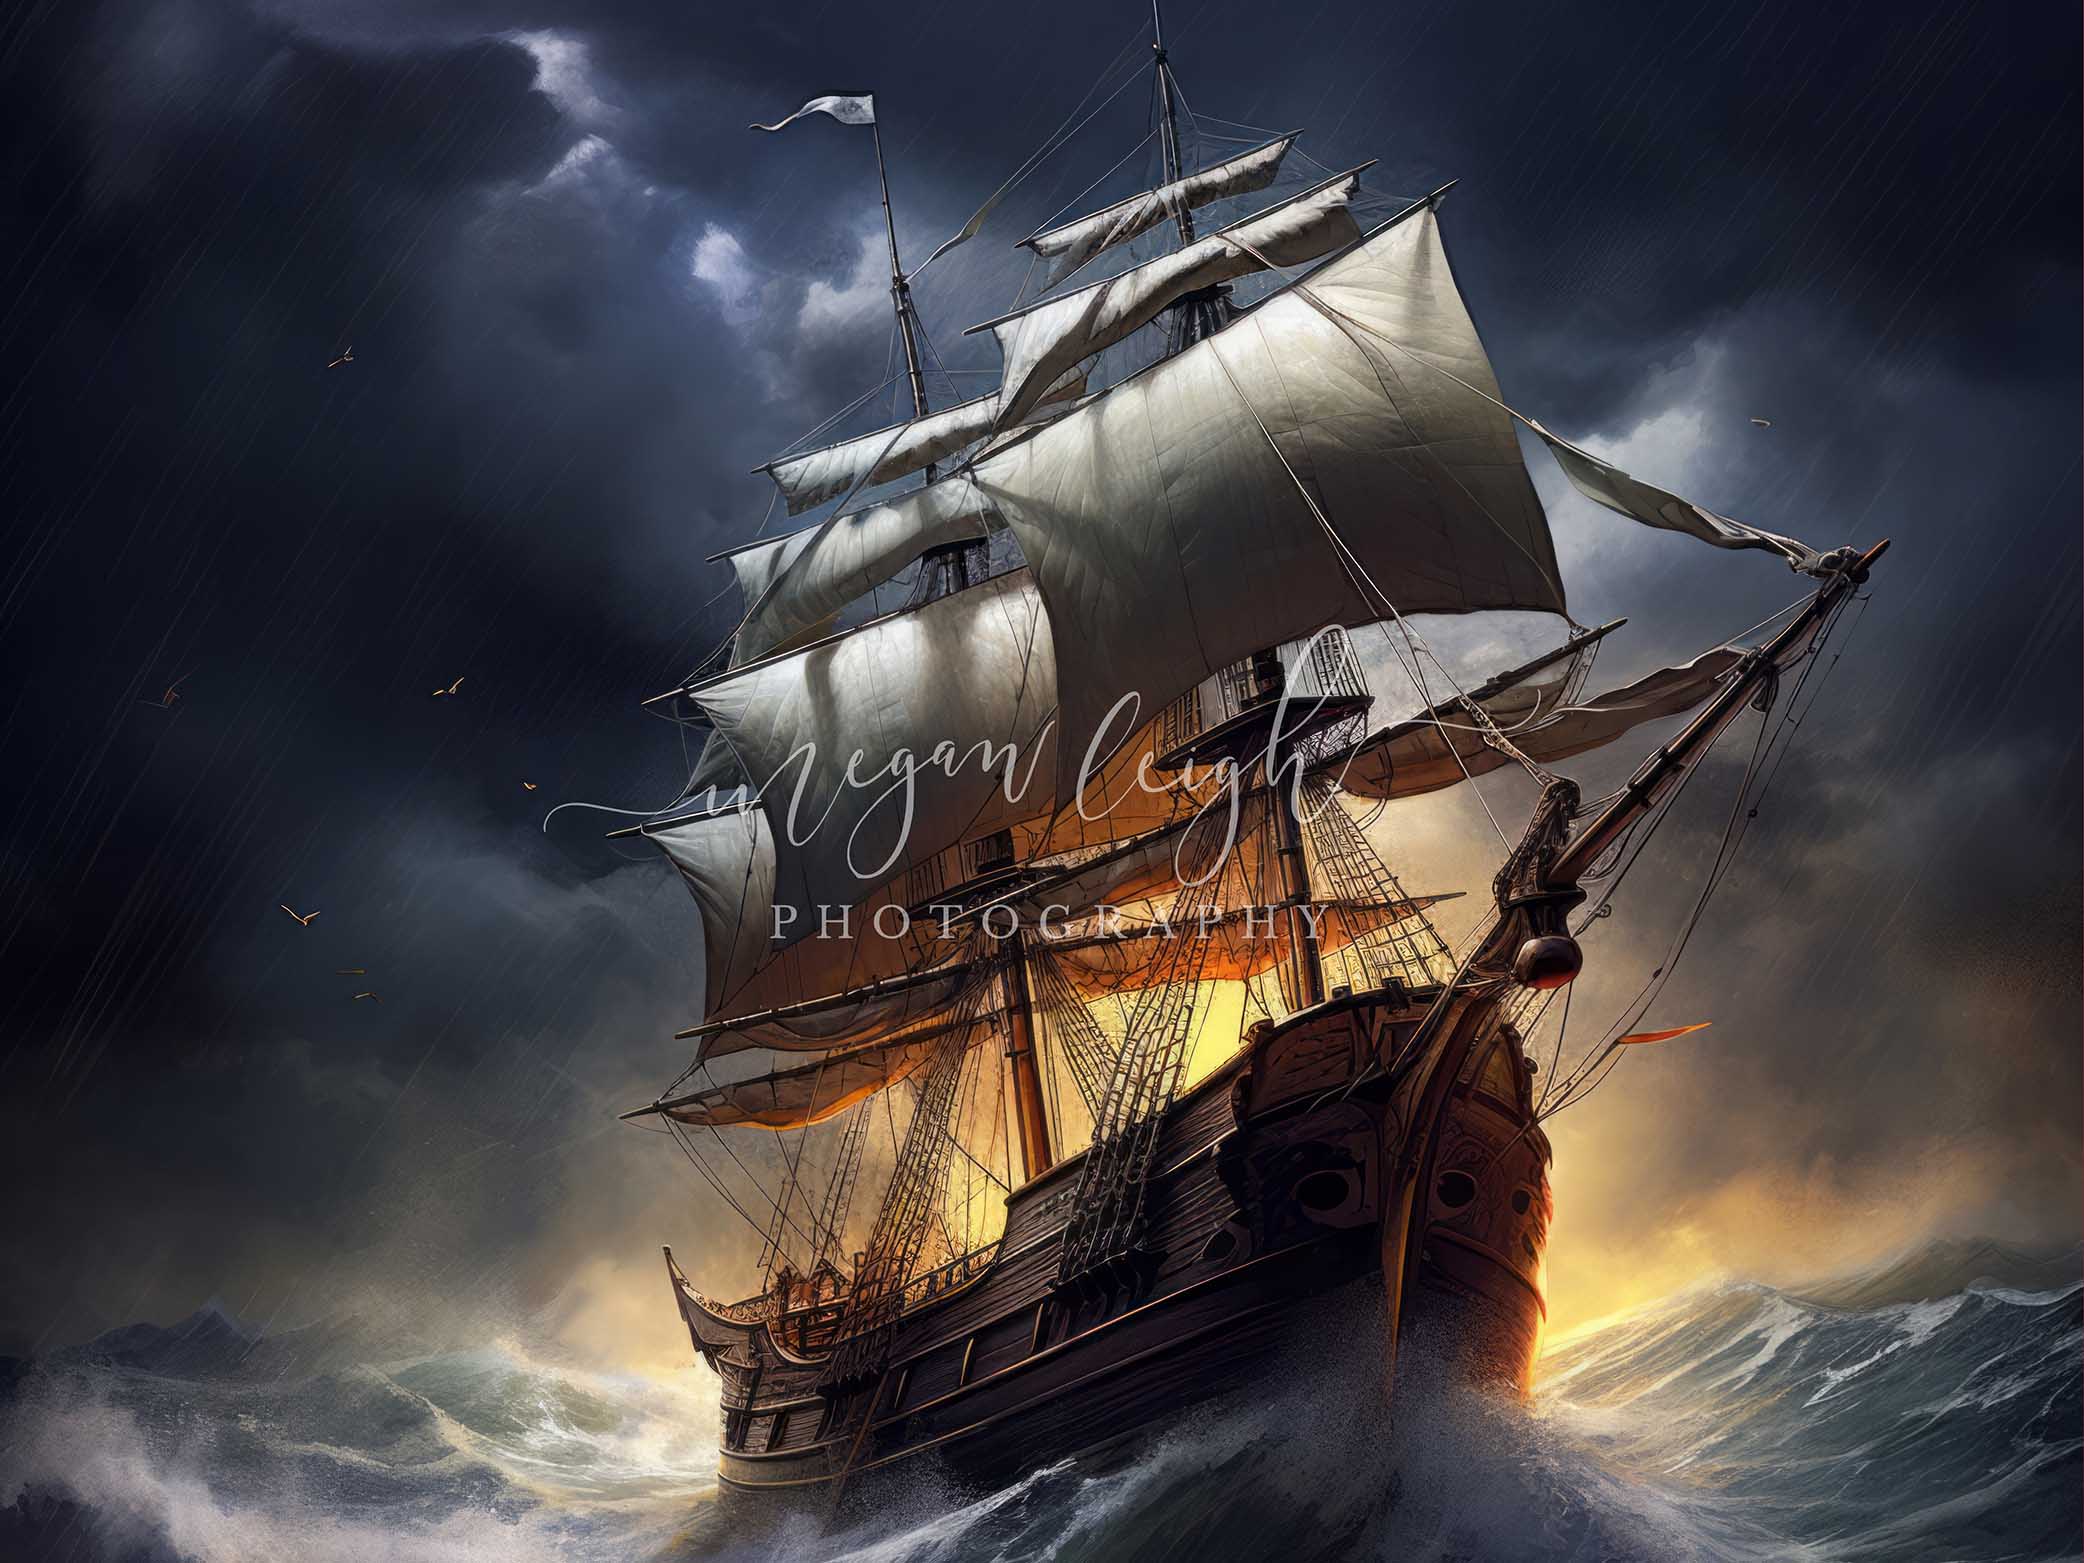 An Ancient Pirate Ship In The Ocean Background, Ship Picture Free,  Shipping, Free Background Image And Wallpaper for Free Download